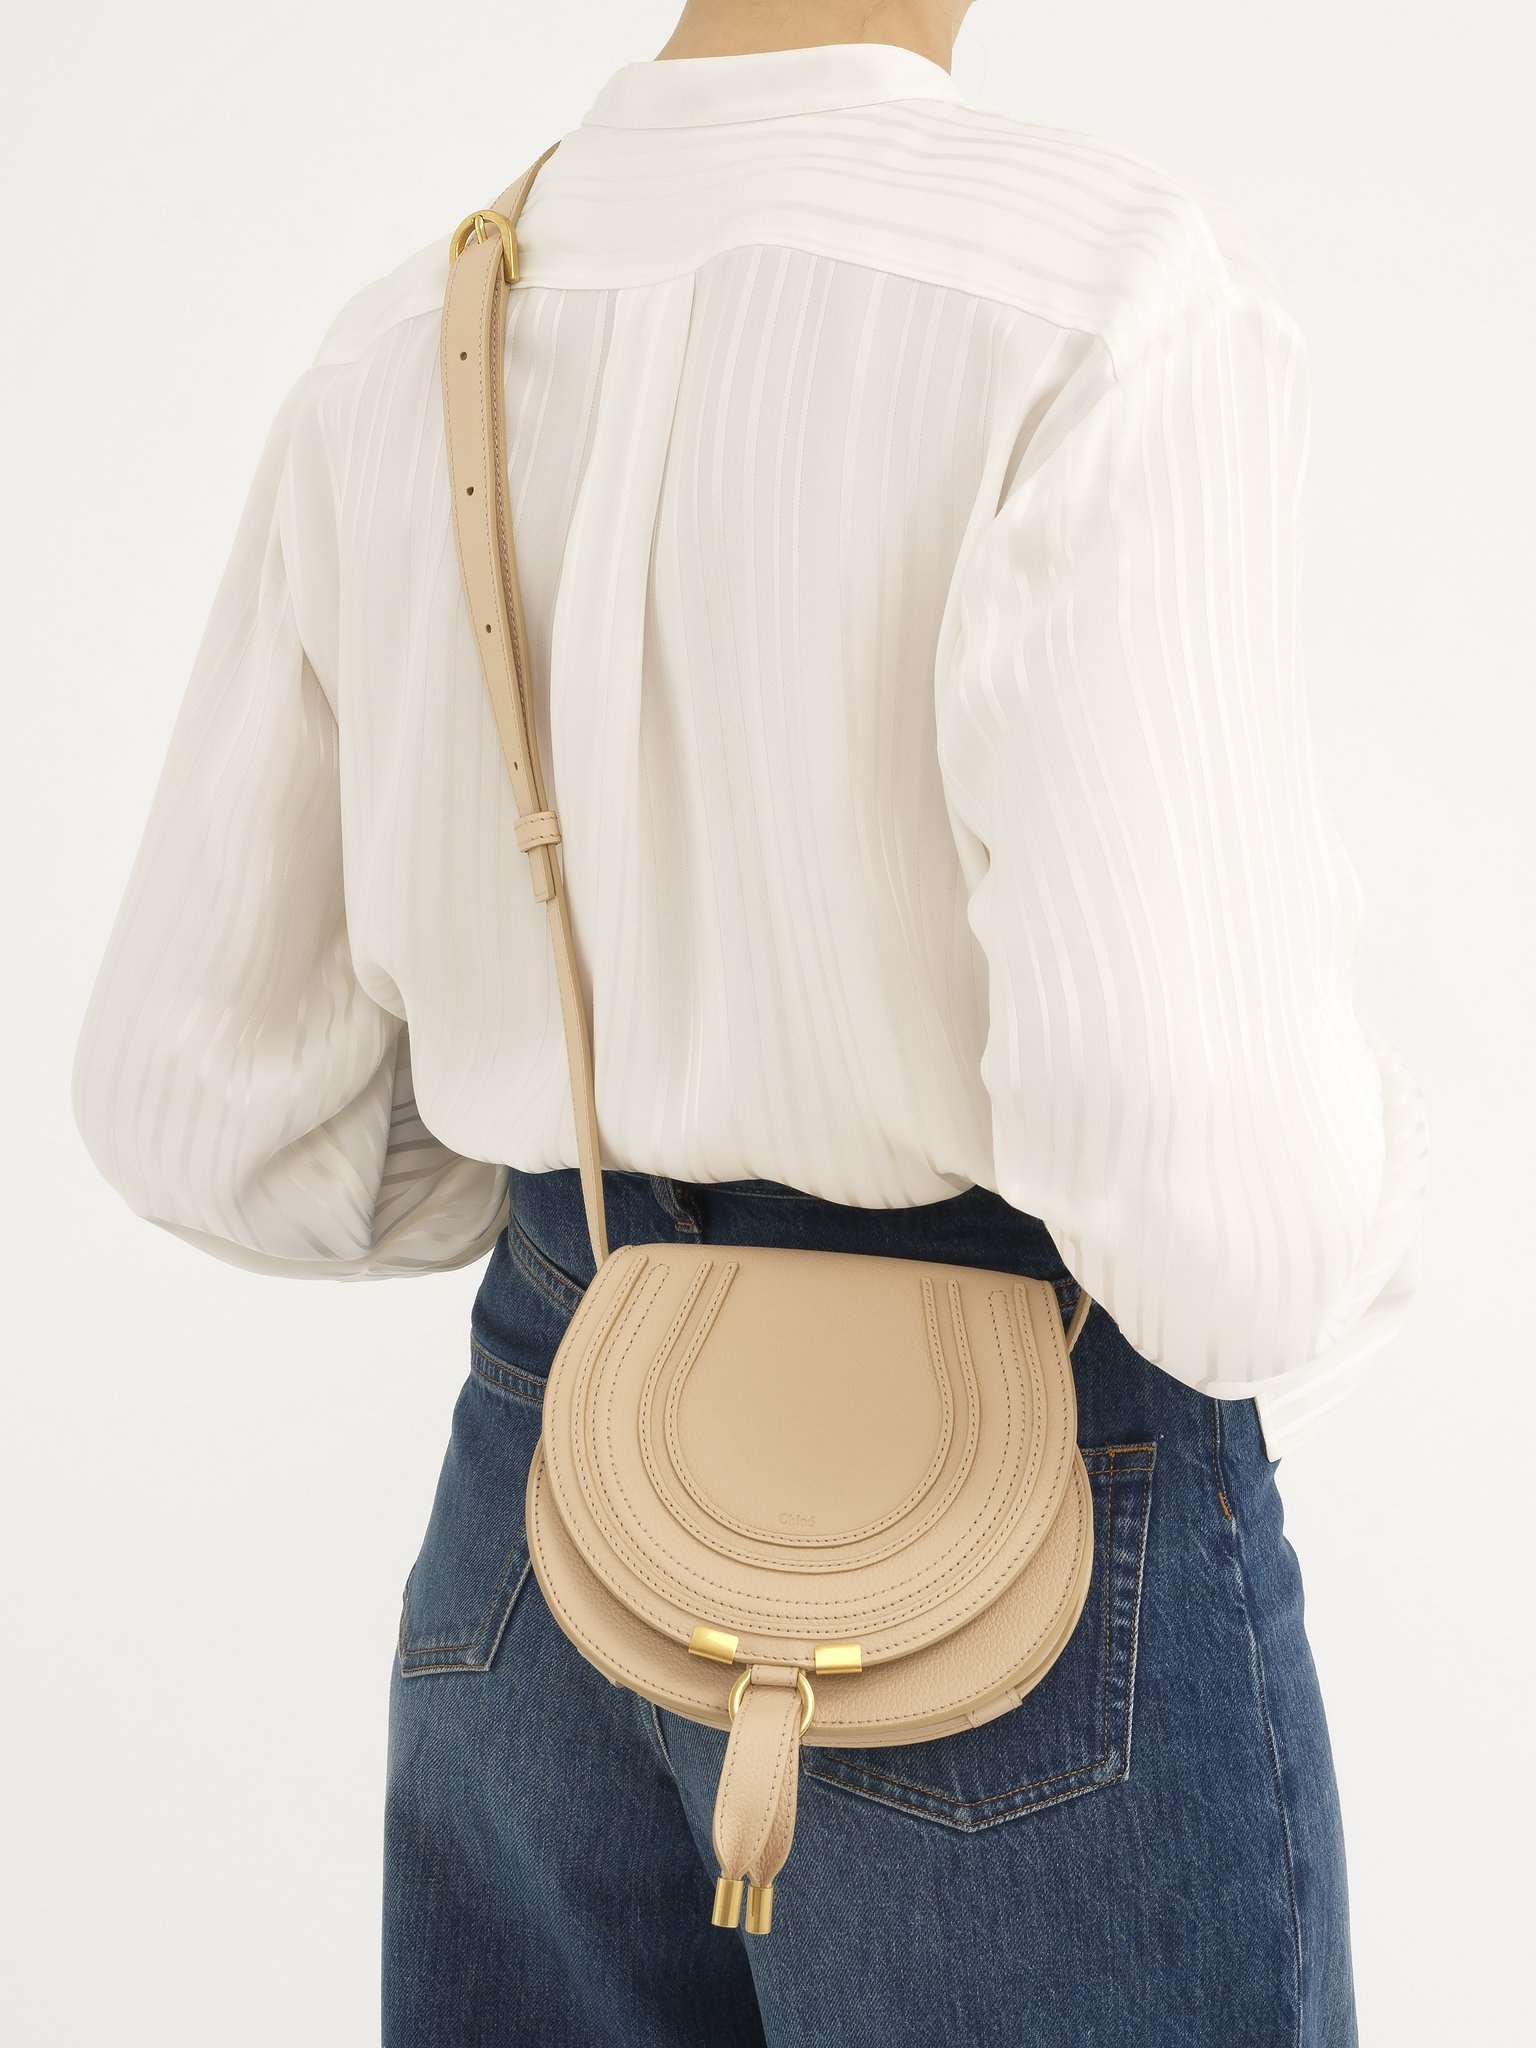 SMALL MARCIE SADDLE BAG IN GRAINED LEATHER - 2